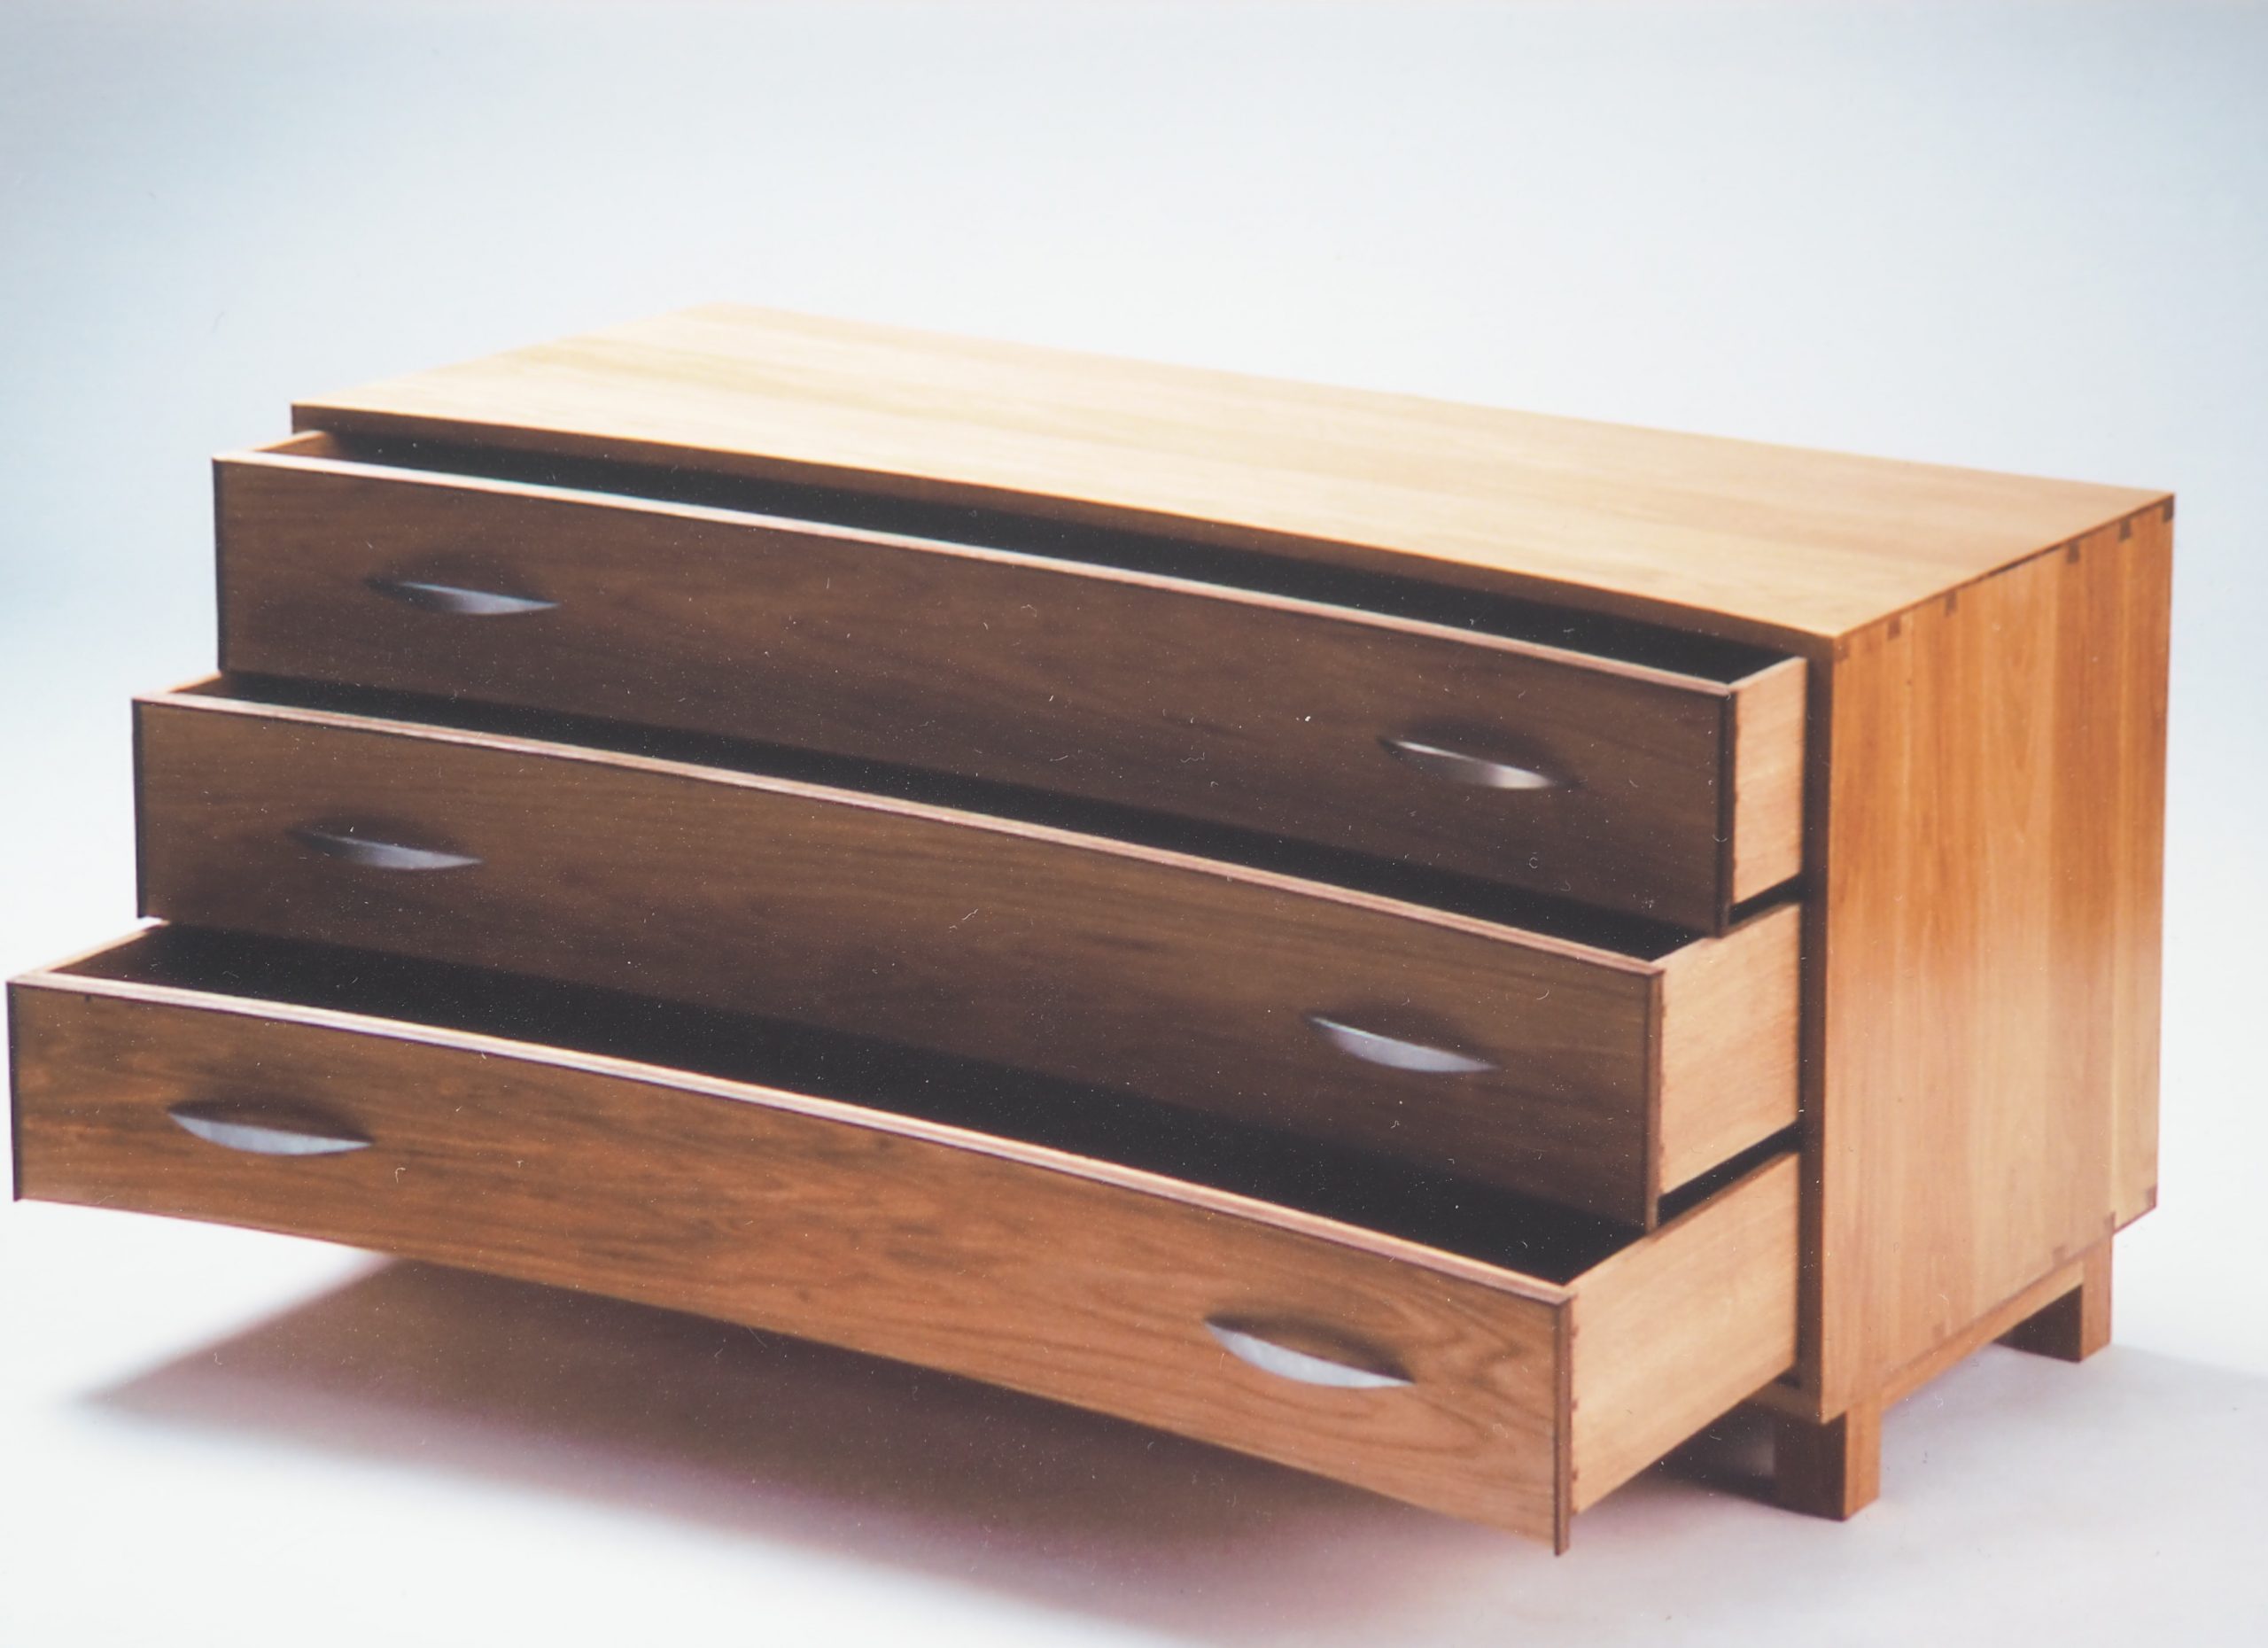 Concave chest of drawers with lipped dovetail construction. Made in chestnut with walnut cock-beading. Three dovetailed drawers with cedar bottoms finish of this timeless peace of furniture.